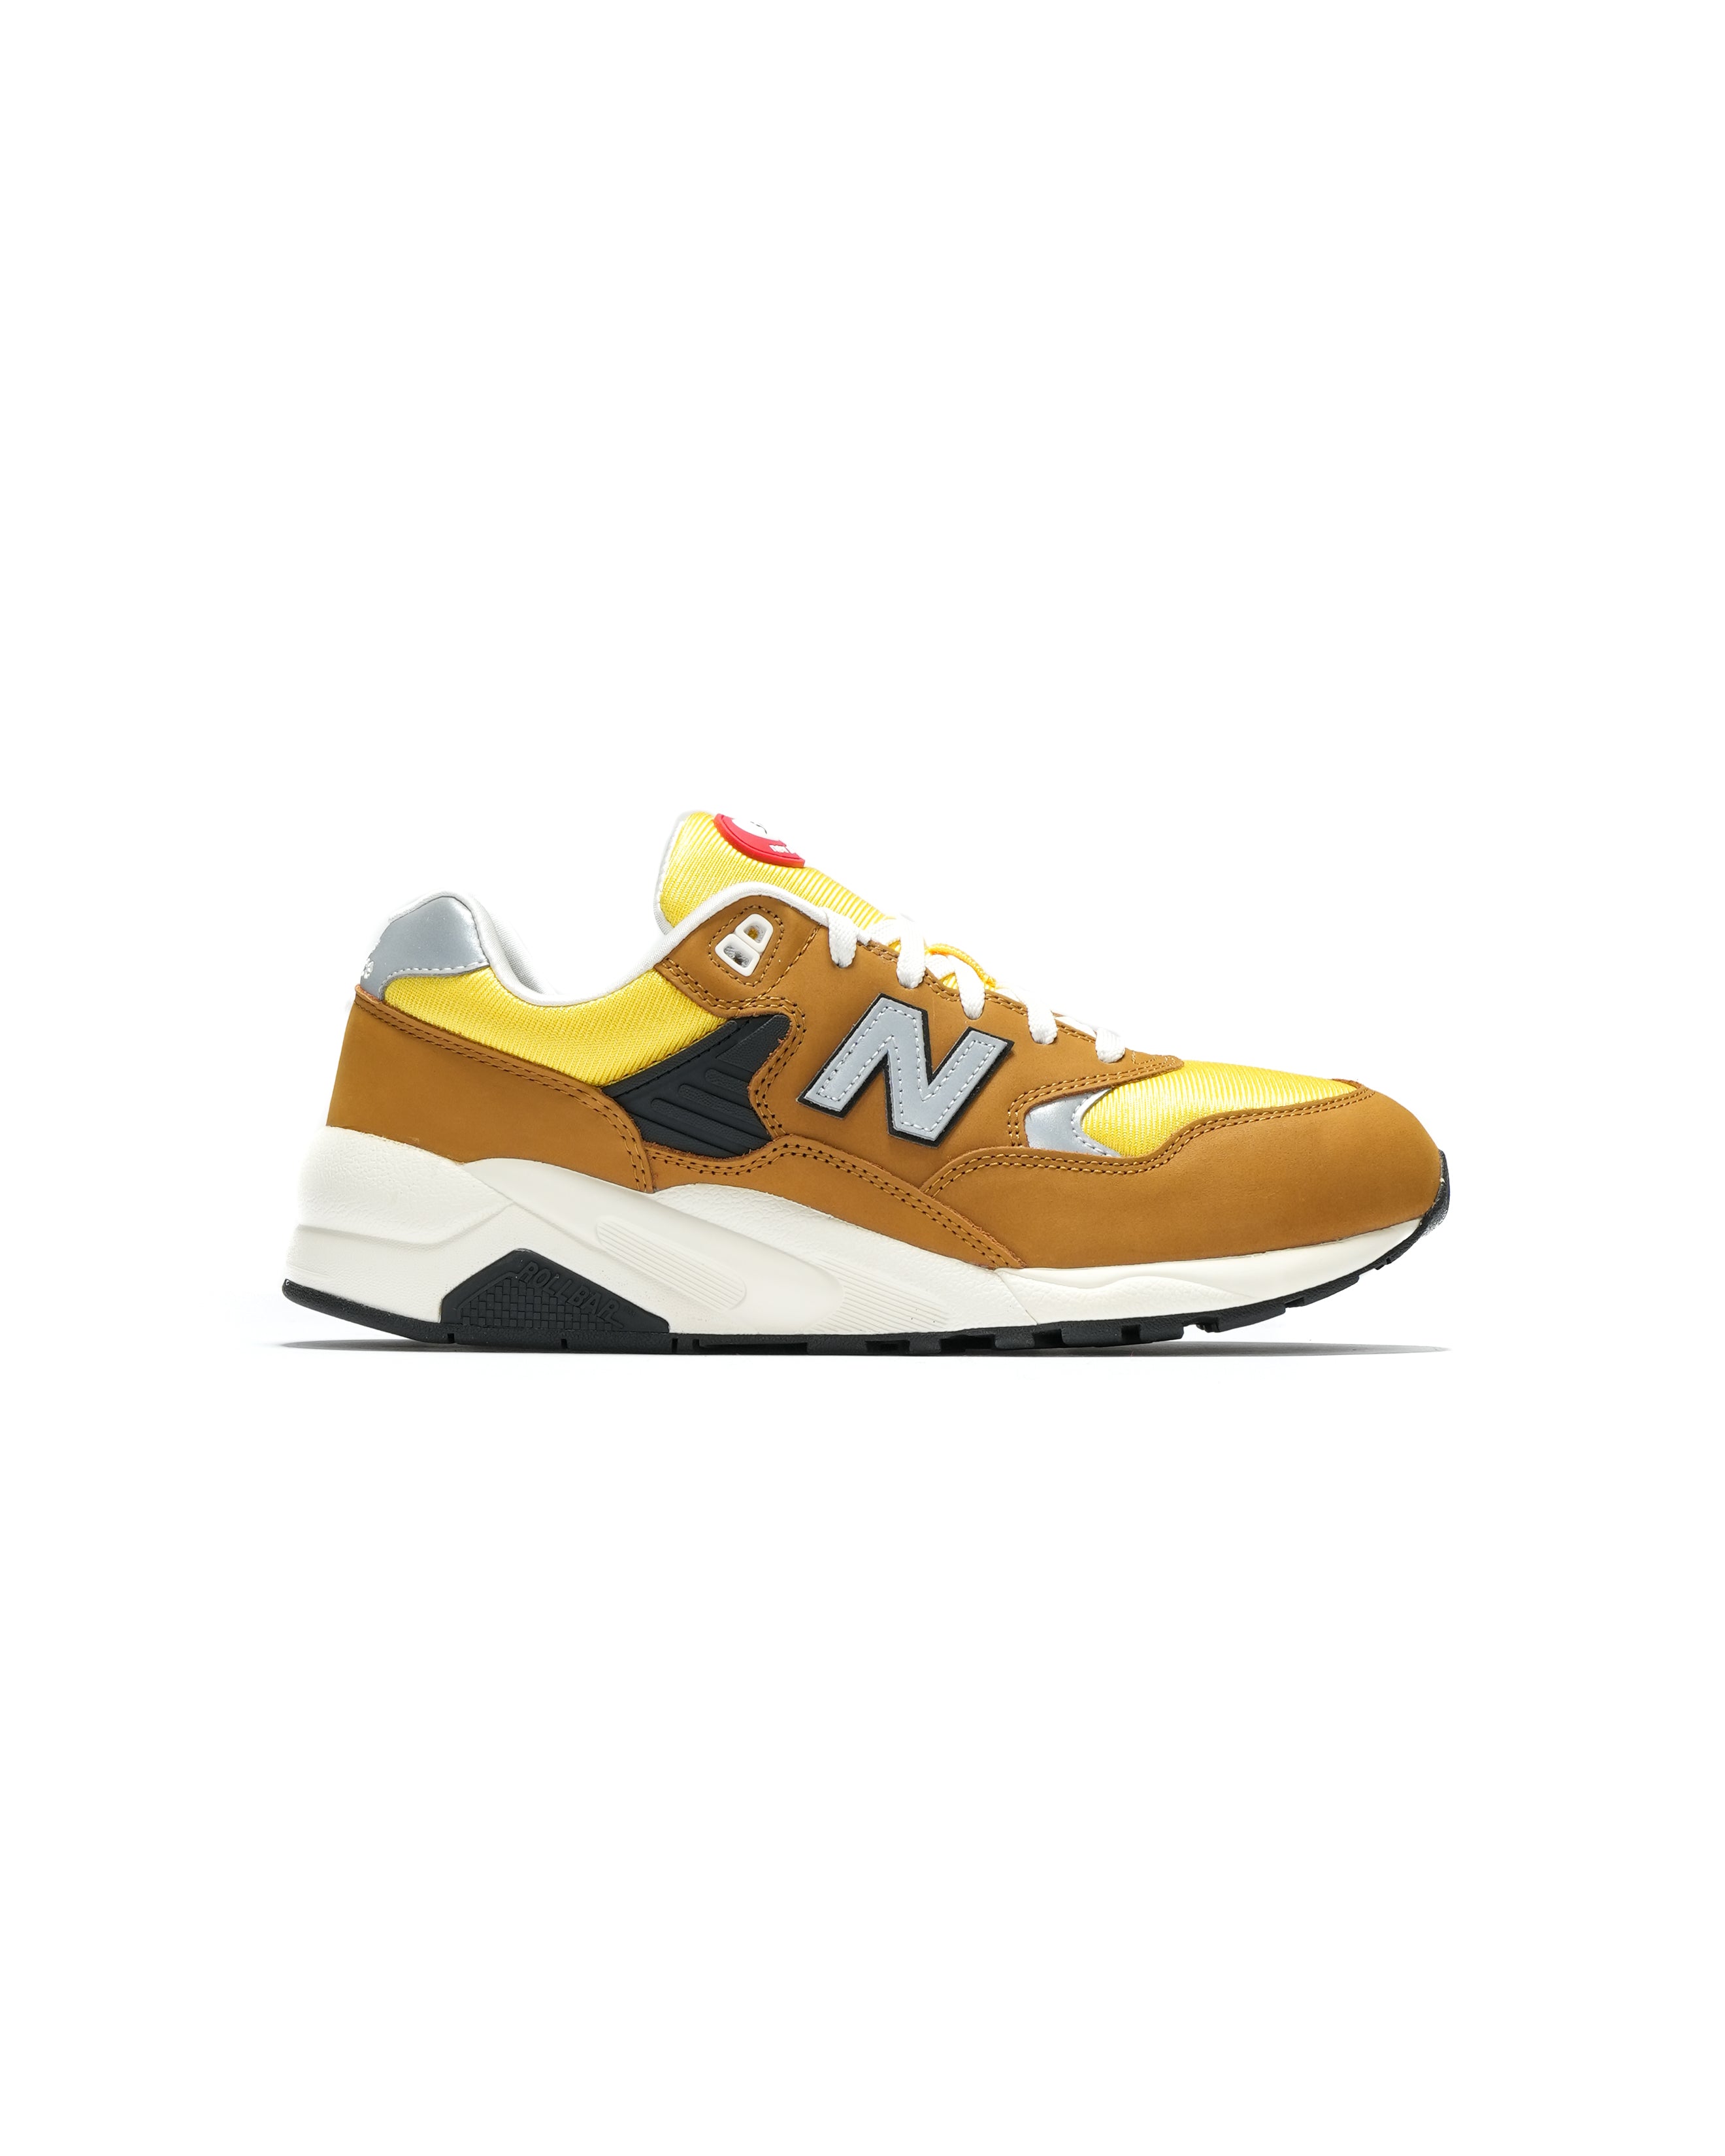 MT580AB2 - Brown/Yellow